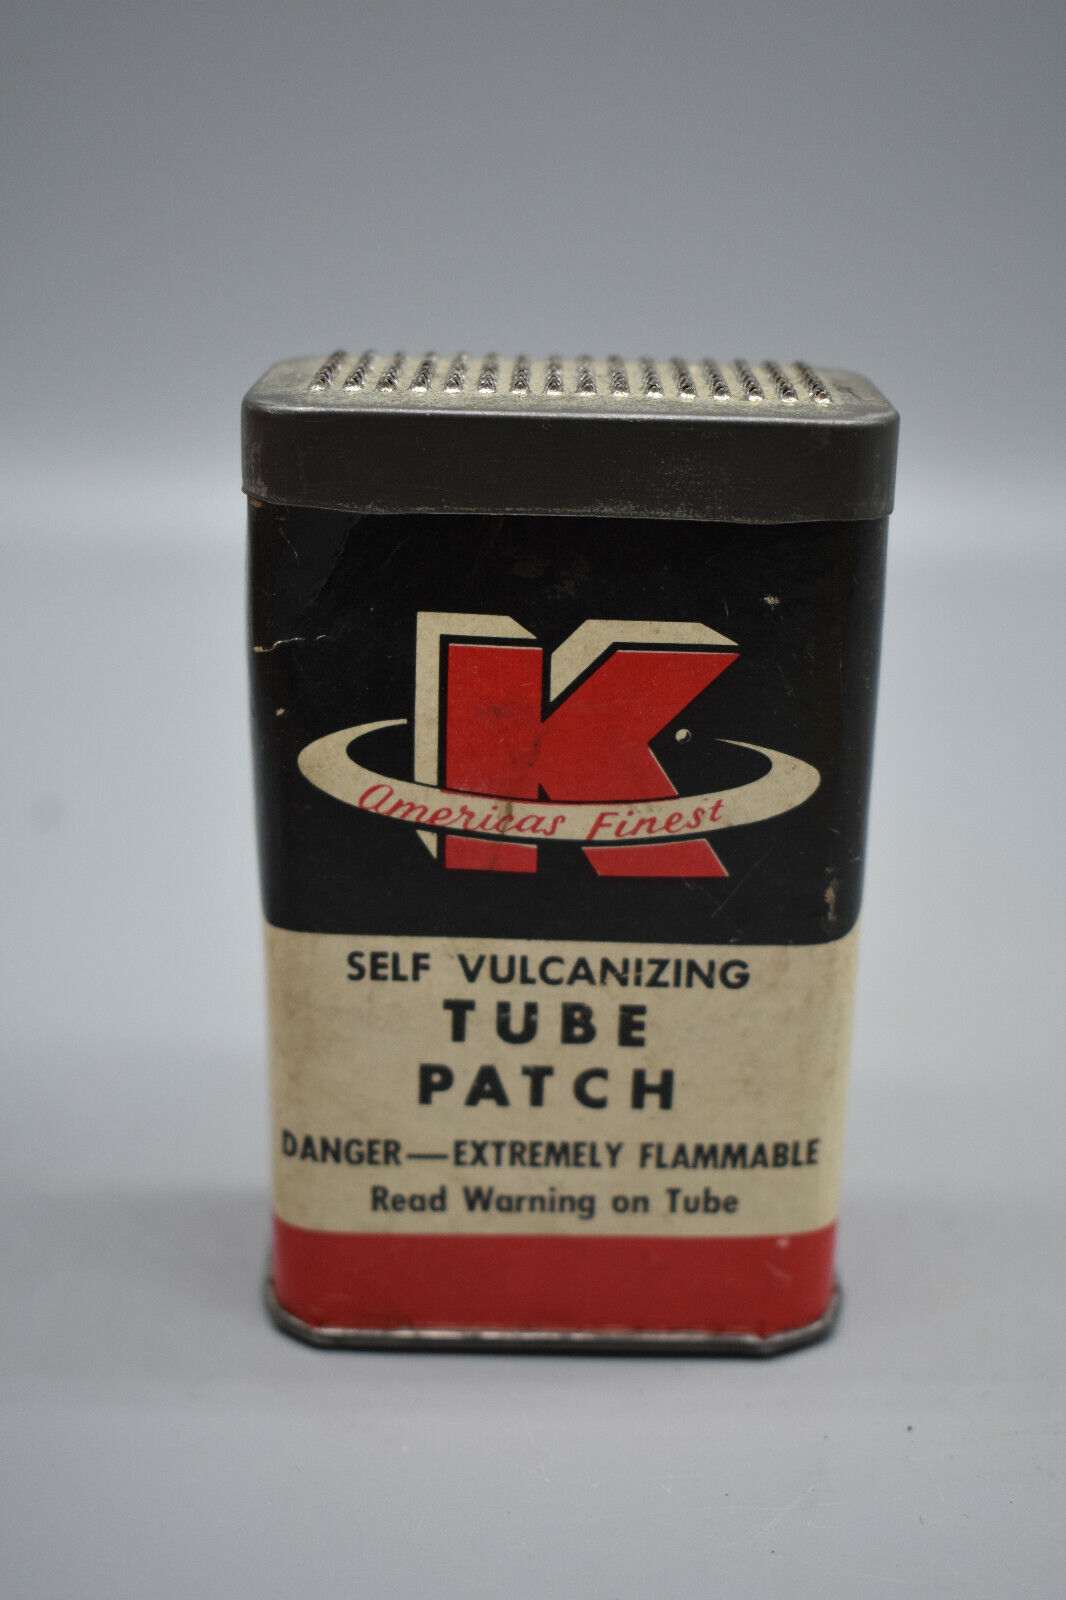 Vintage Kex America\'s Finest Tube Patch, Made in  USA. Cardboard -Collectible